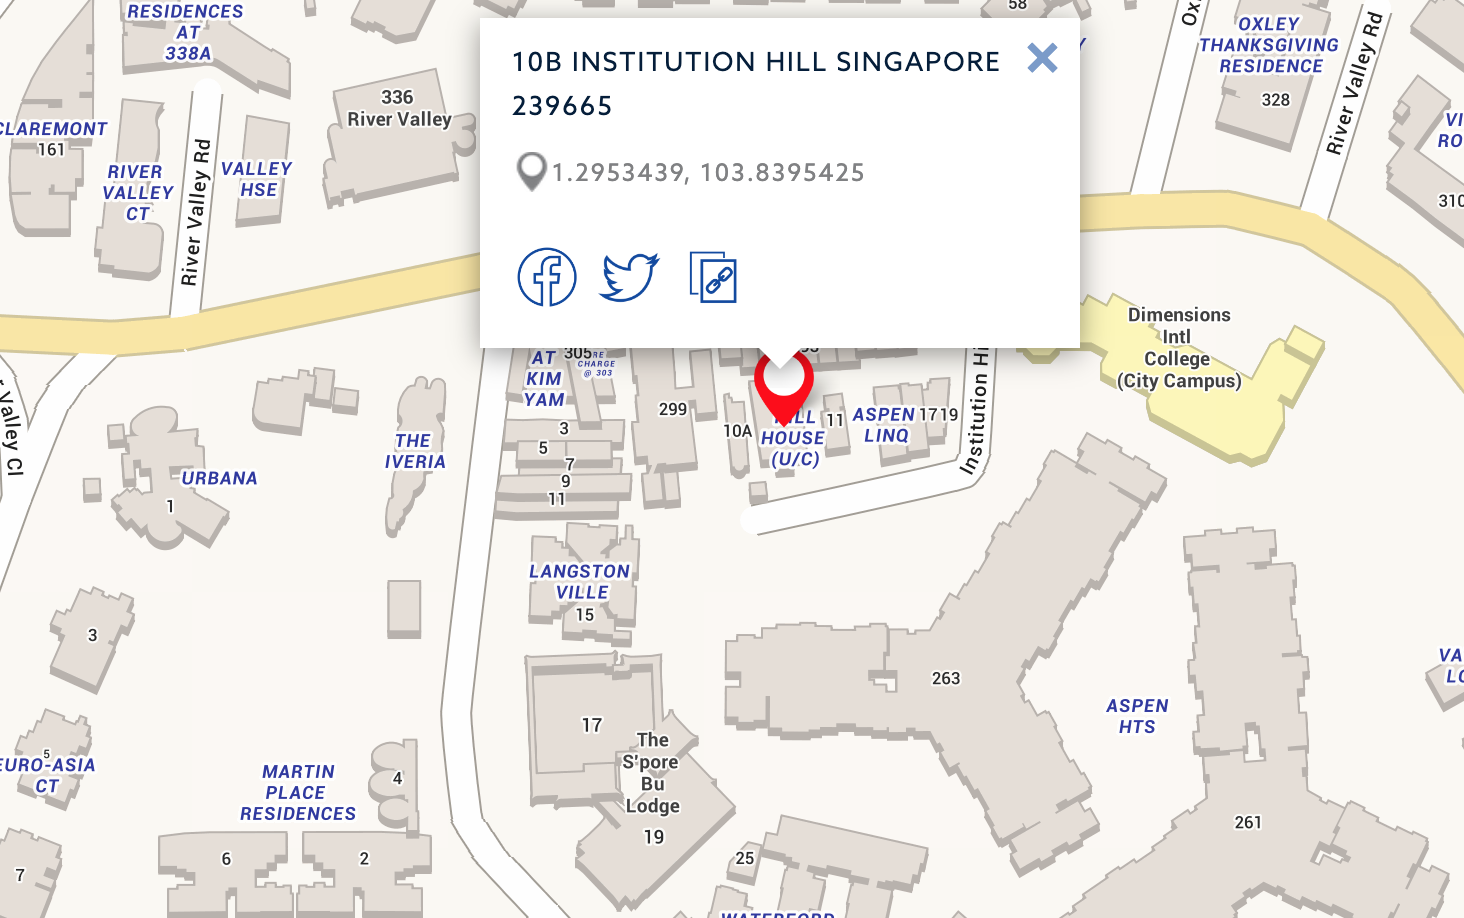 New Launch Condo in Singapore - Hill House @ Institutional Hill land parcel